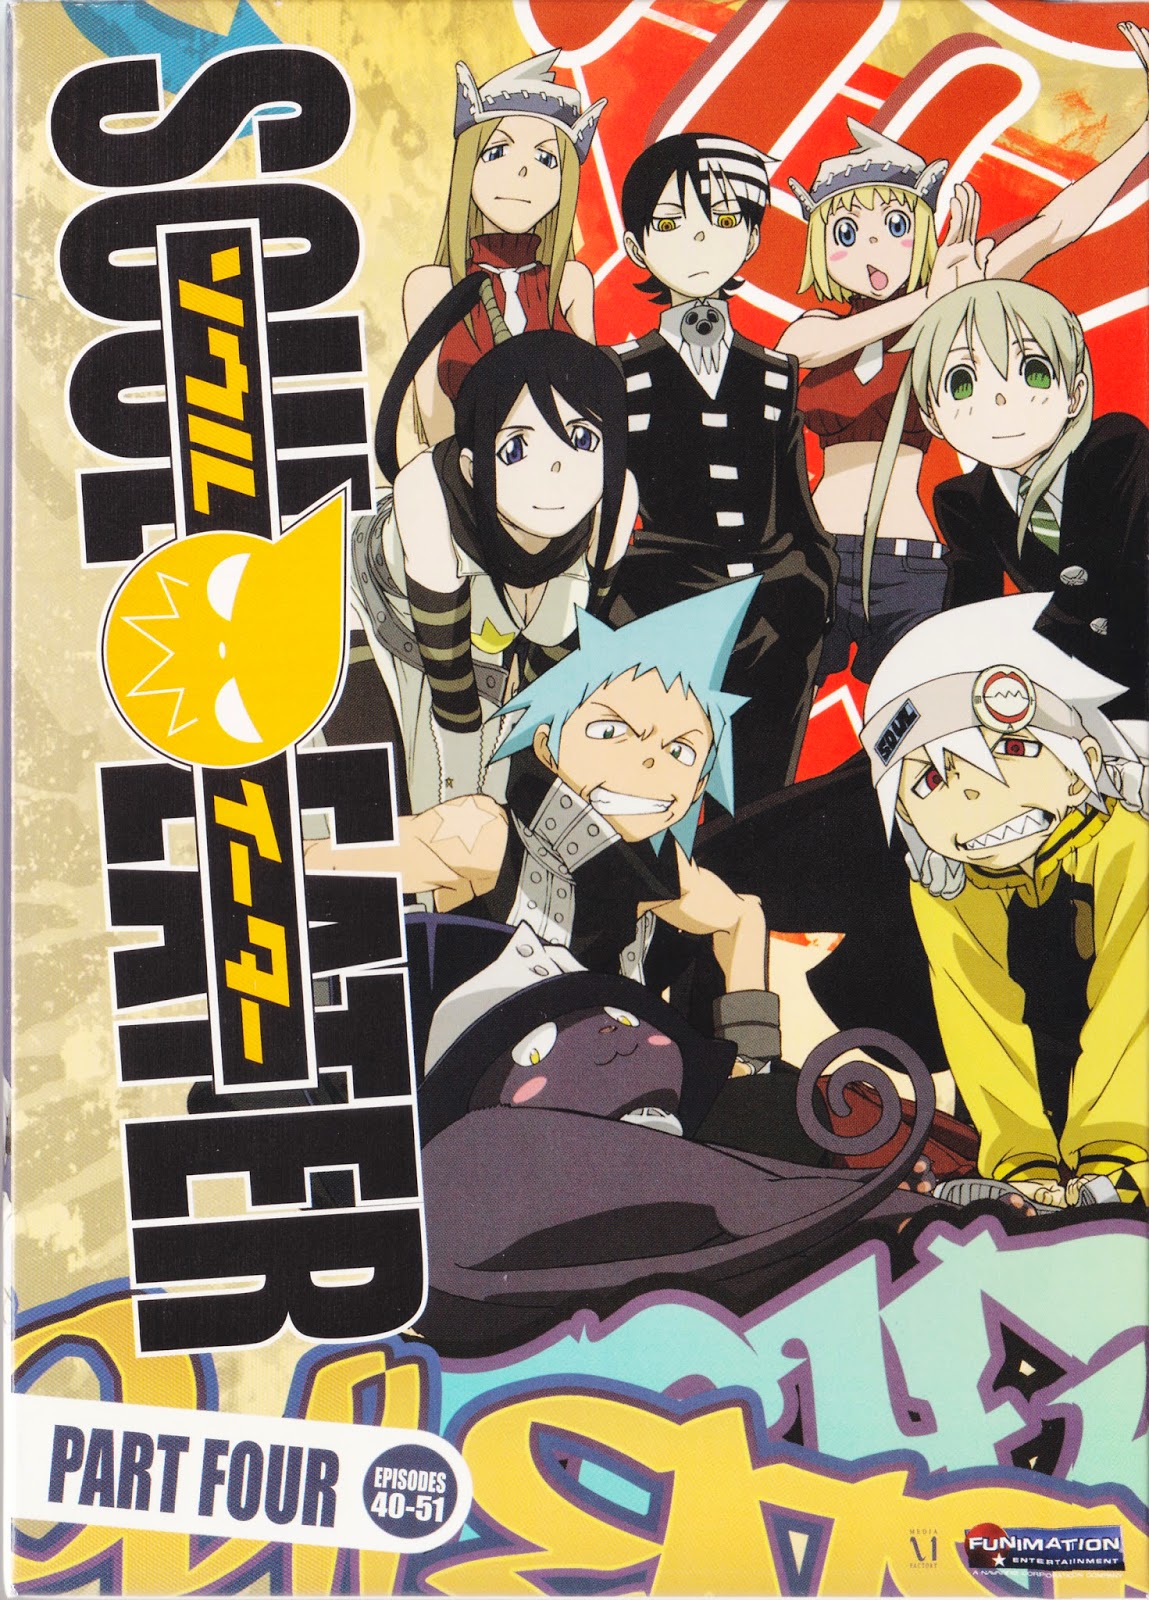 Anime Review 143 Soul Eater – TakaCode Reviews